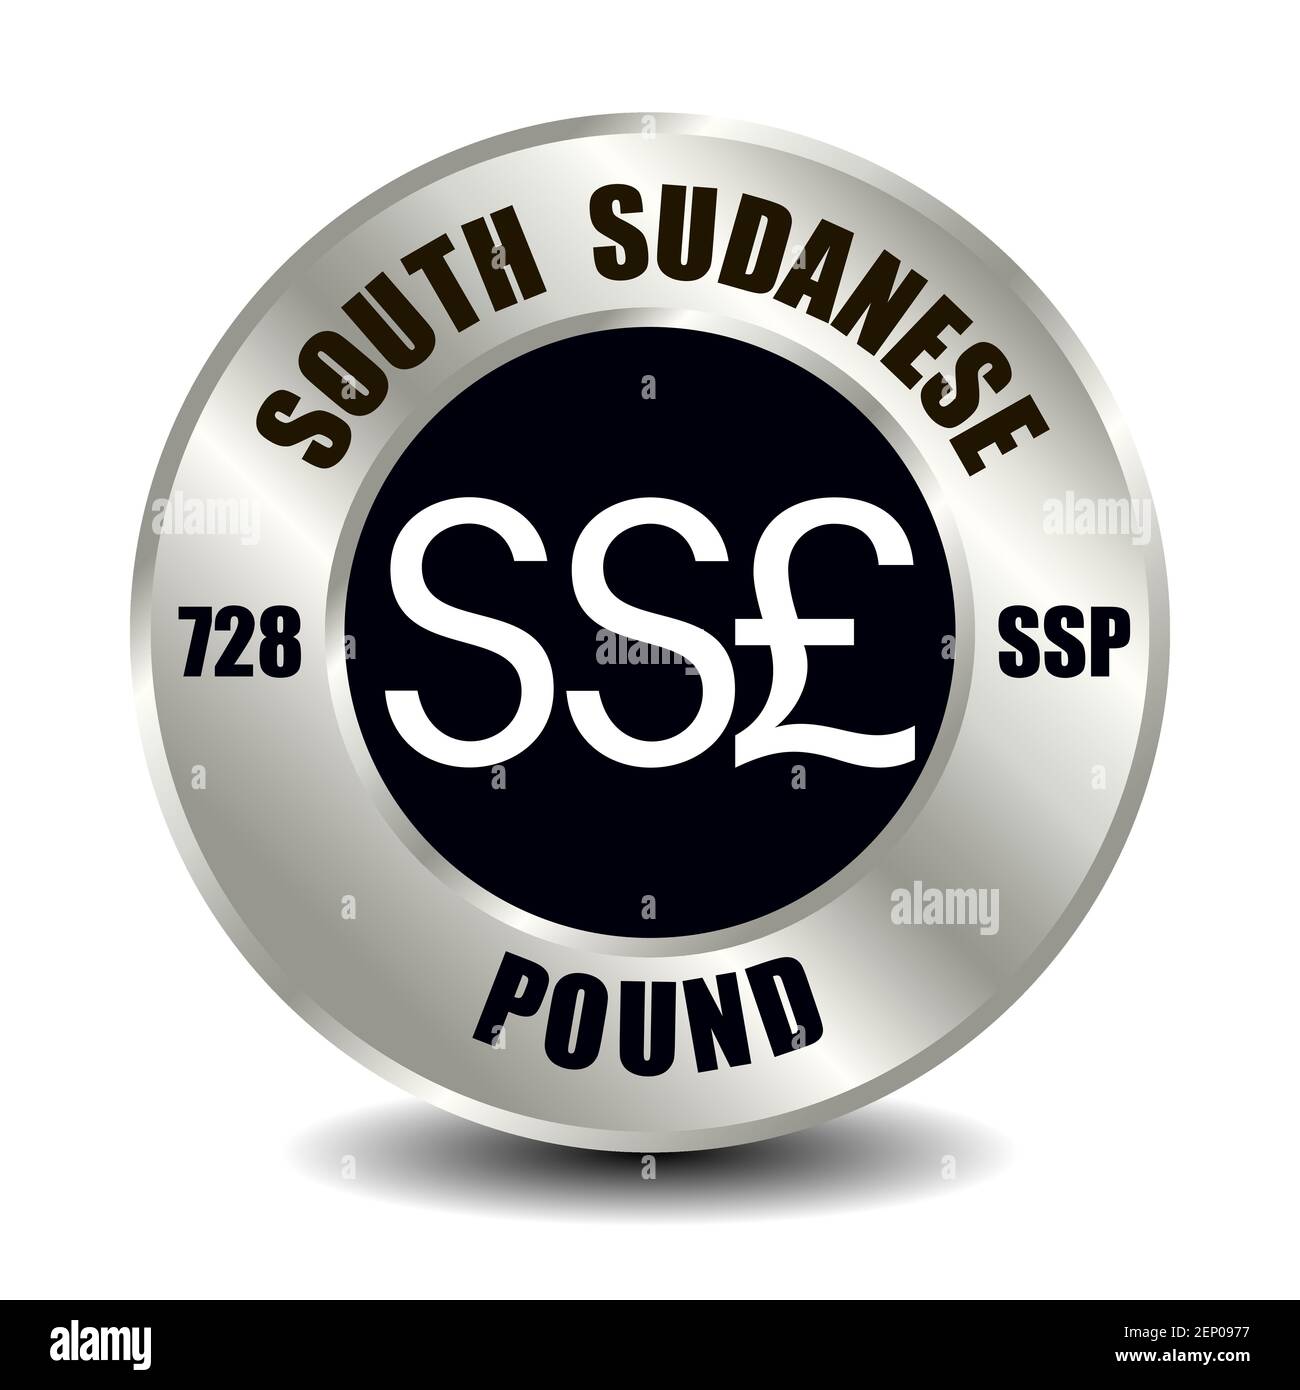 South Sudan money icon isolated on round silver coin. Vector sign of currency symbol with international ISO code and abbreviation Stock Vector